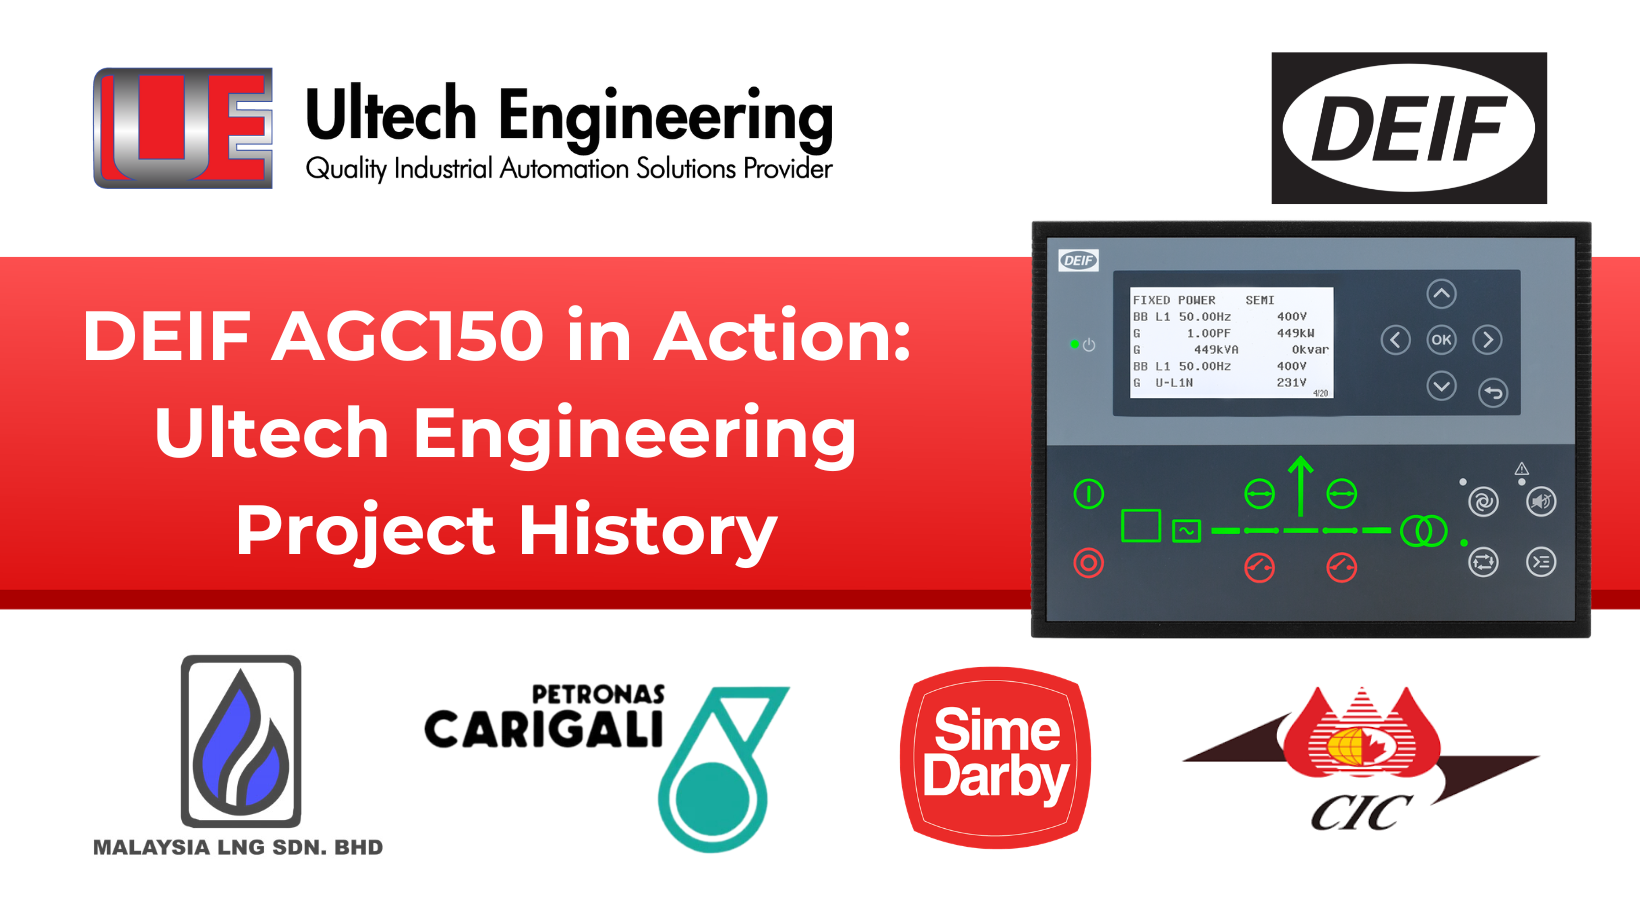 Ultech Engineering Project History with DEIF AGC150 in Action